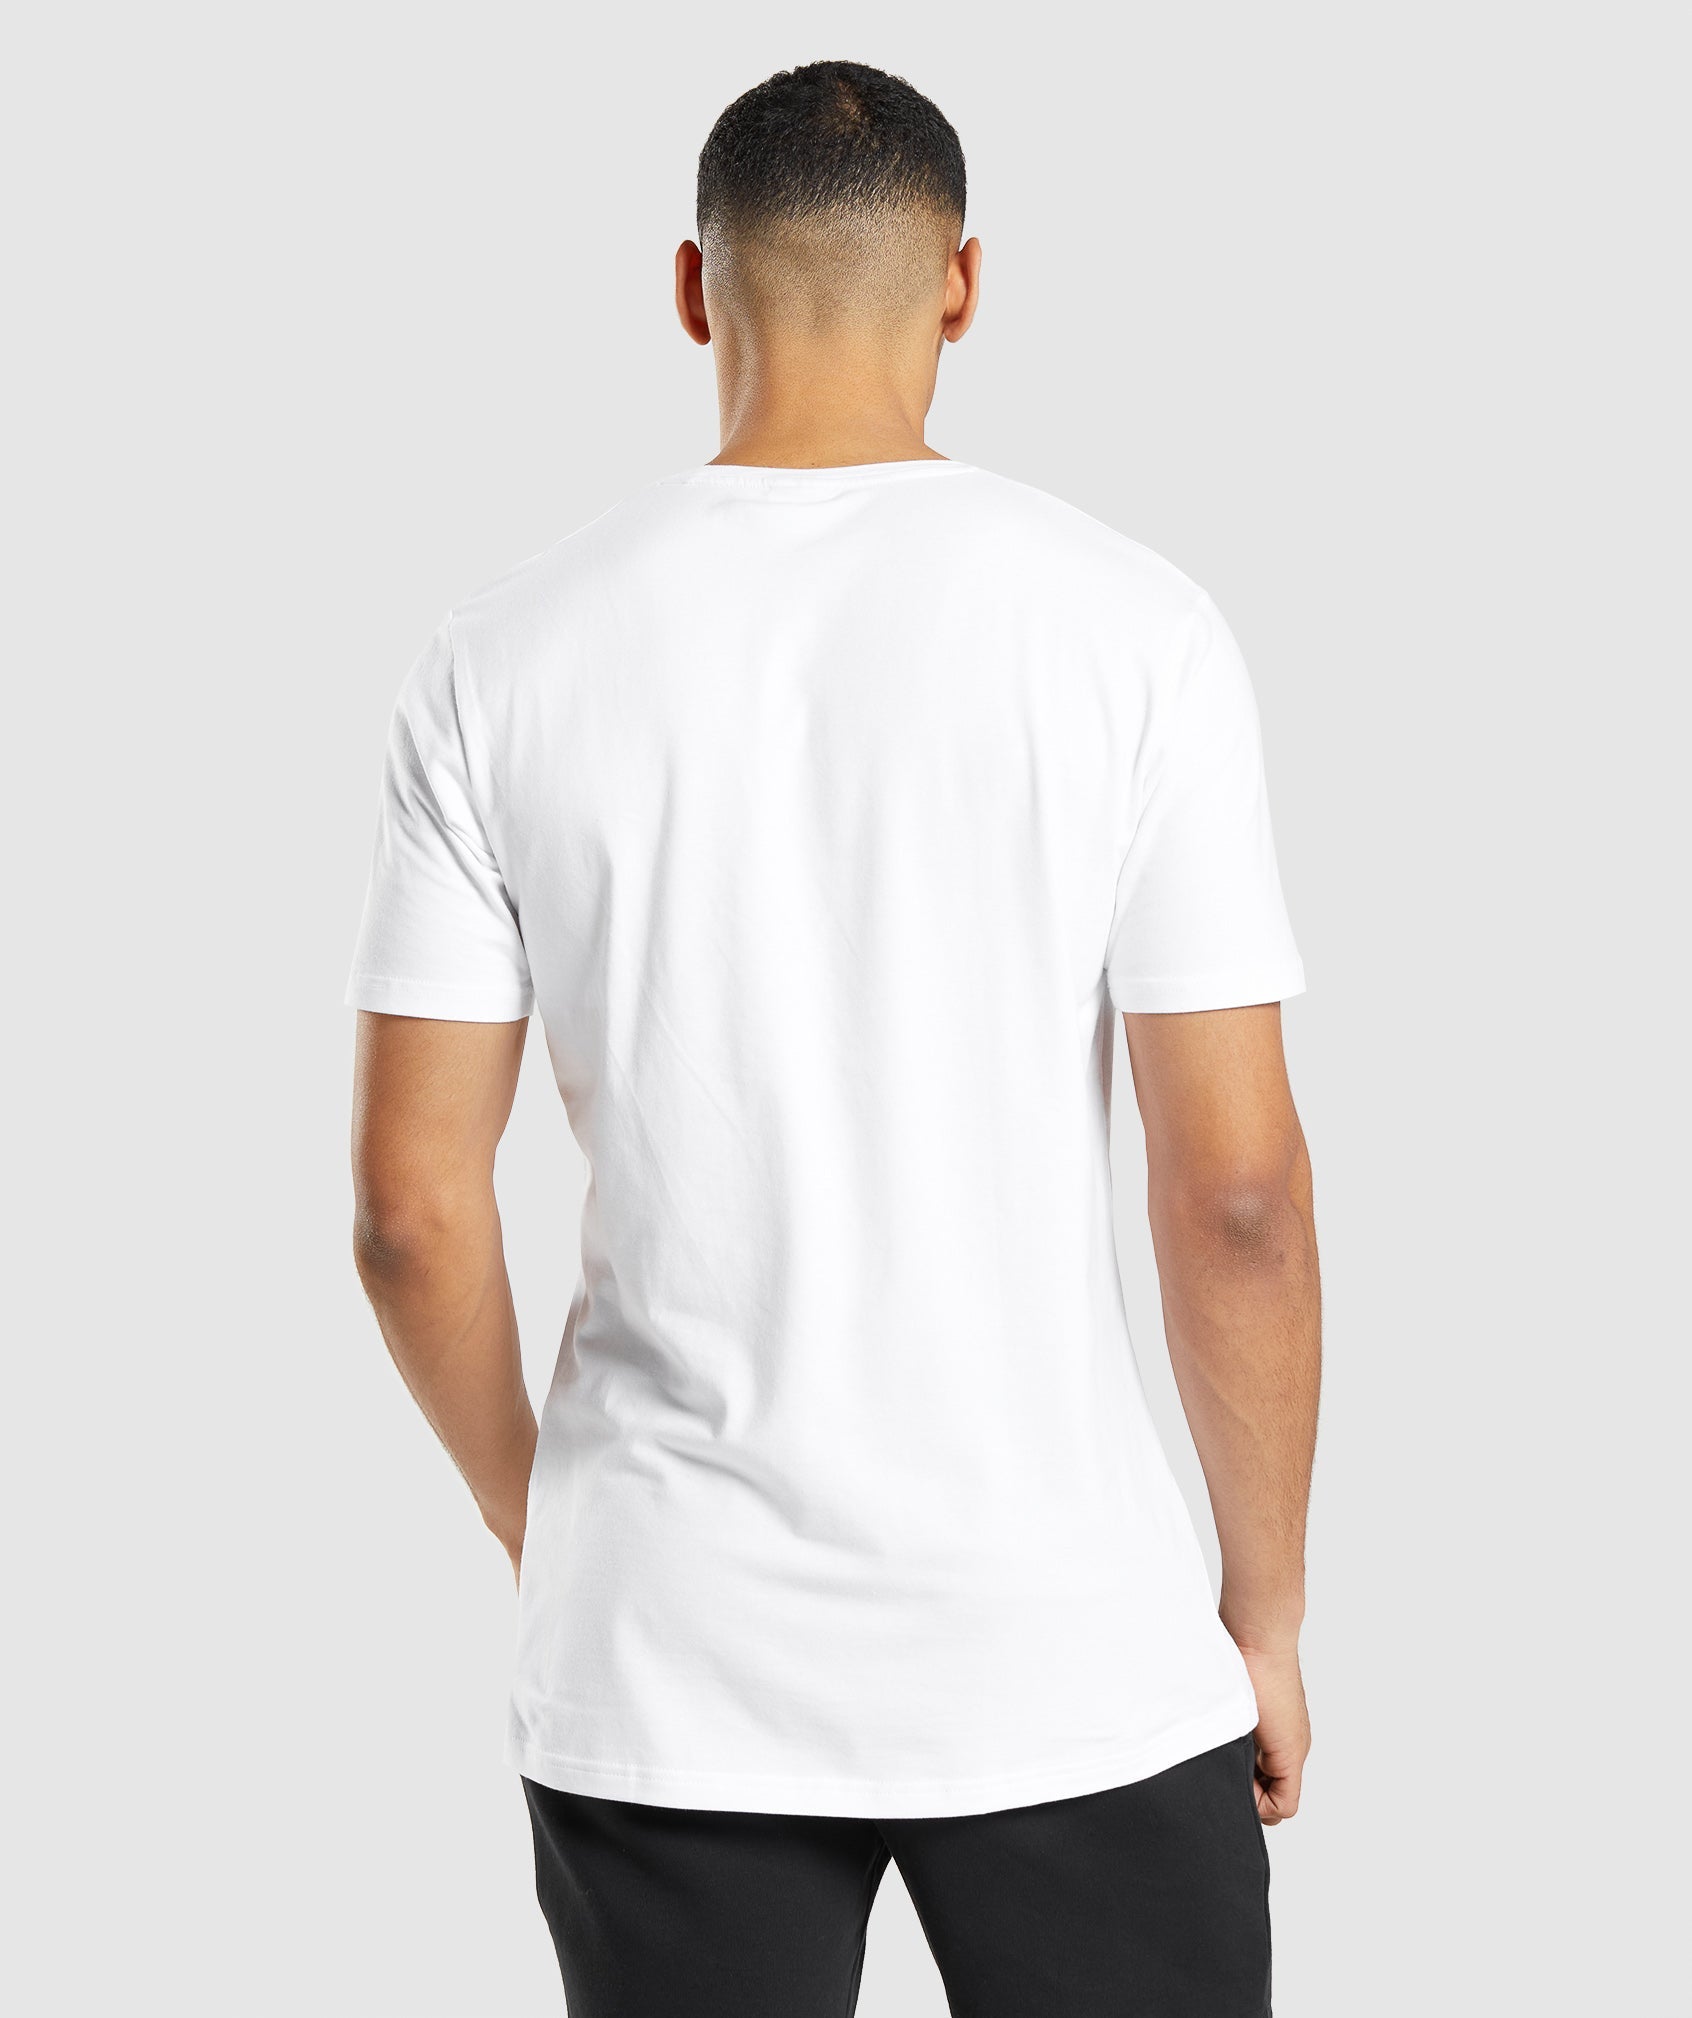 Essential T-Shirt in White - view 3